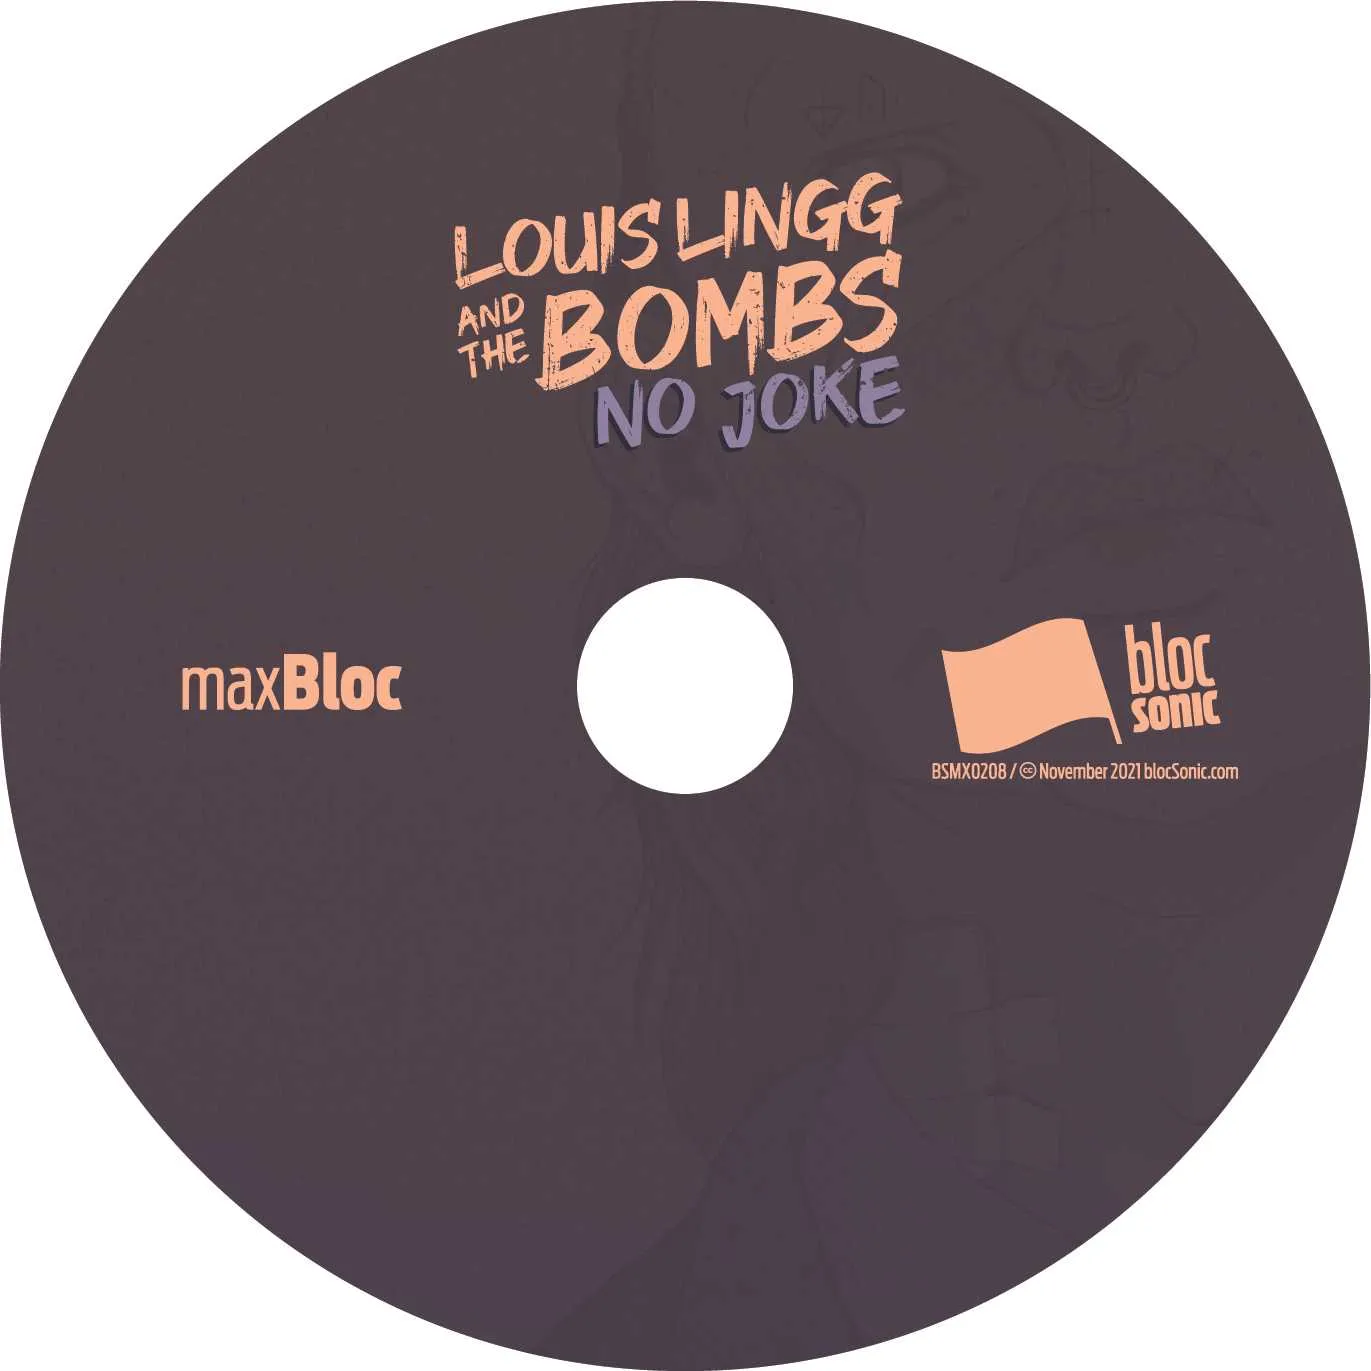 Album disc for “No Joke” by Louis Lingg and The Bombs